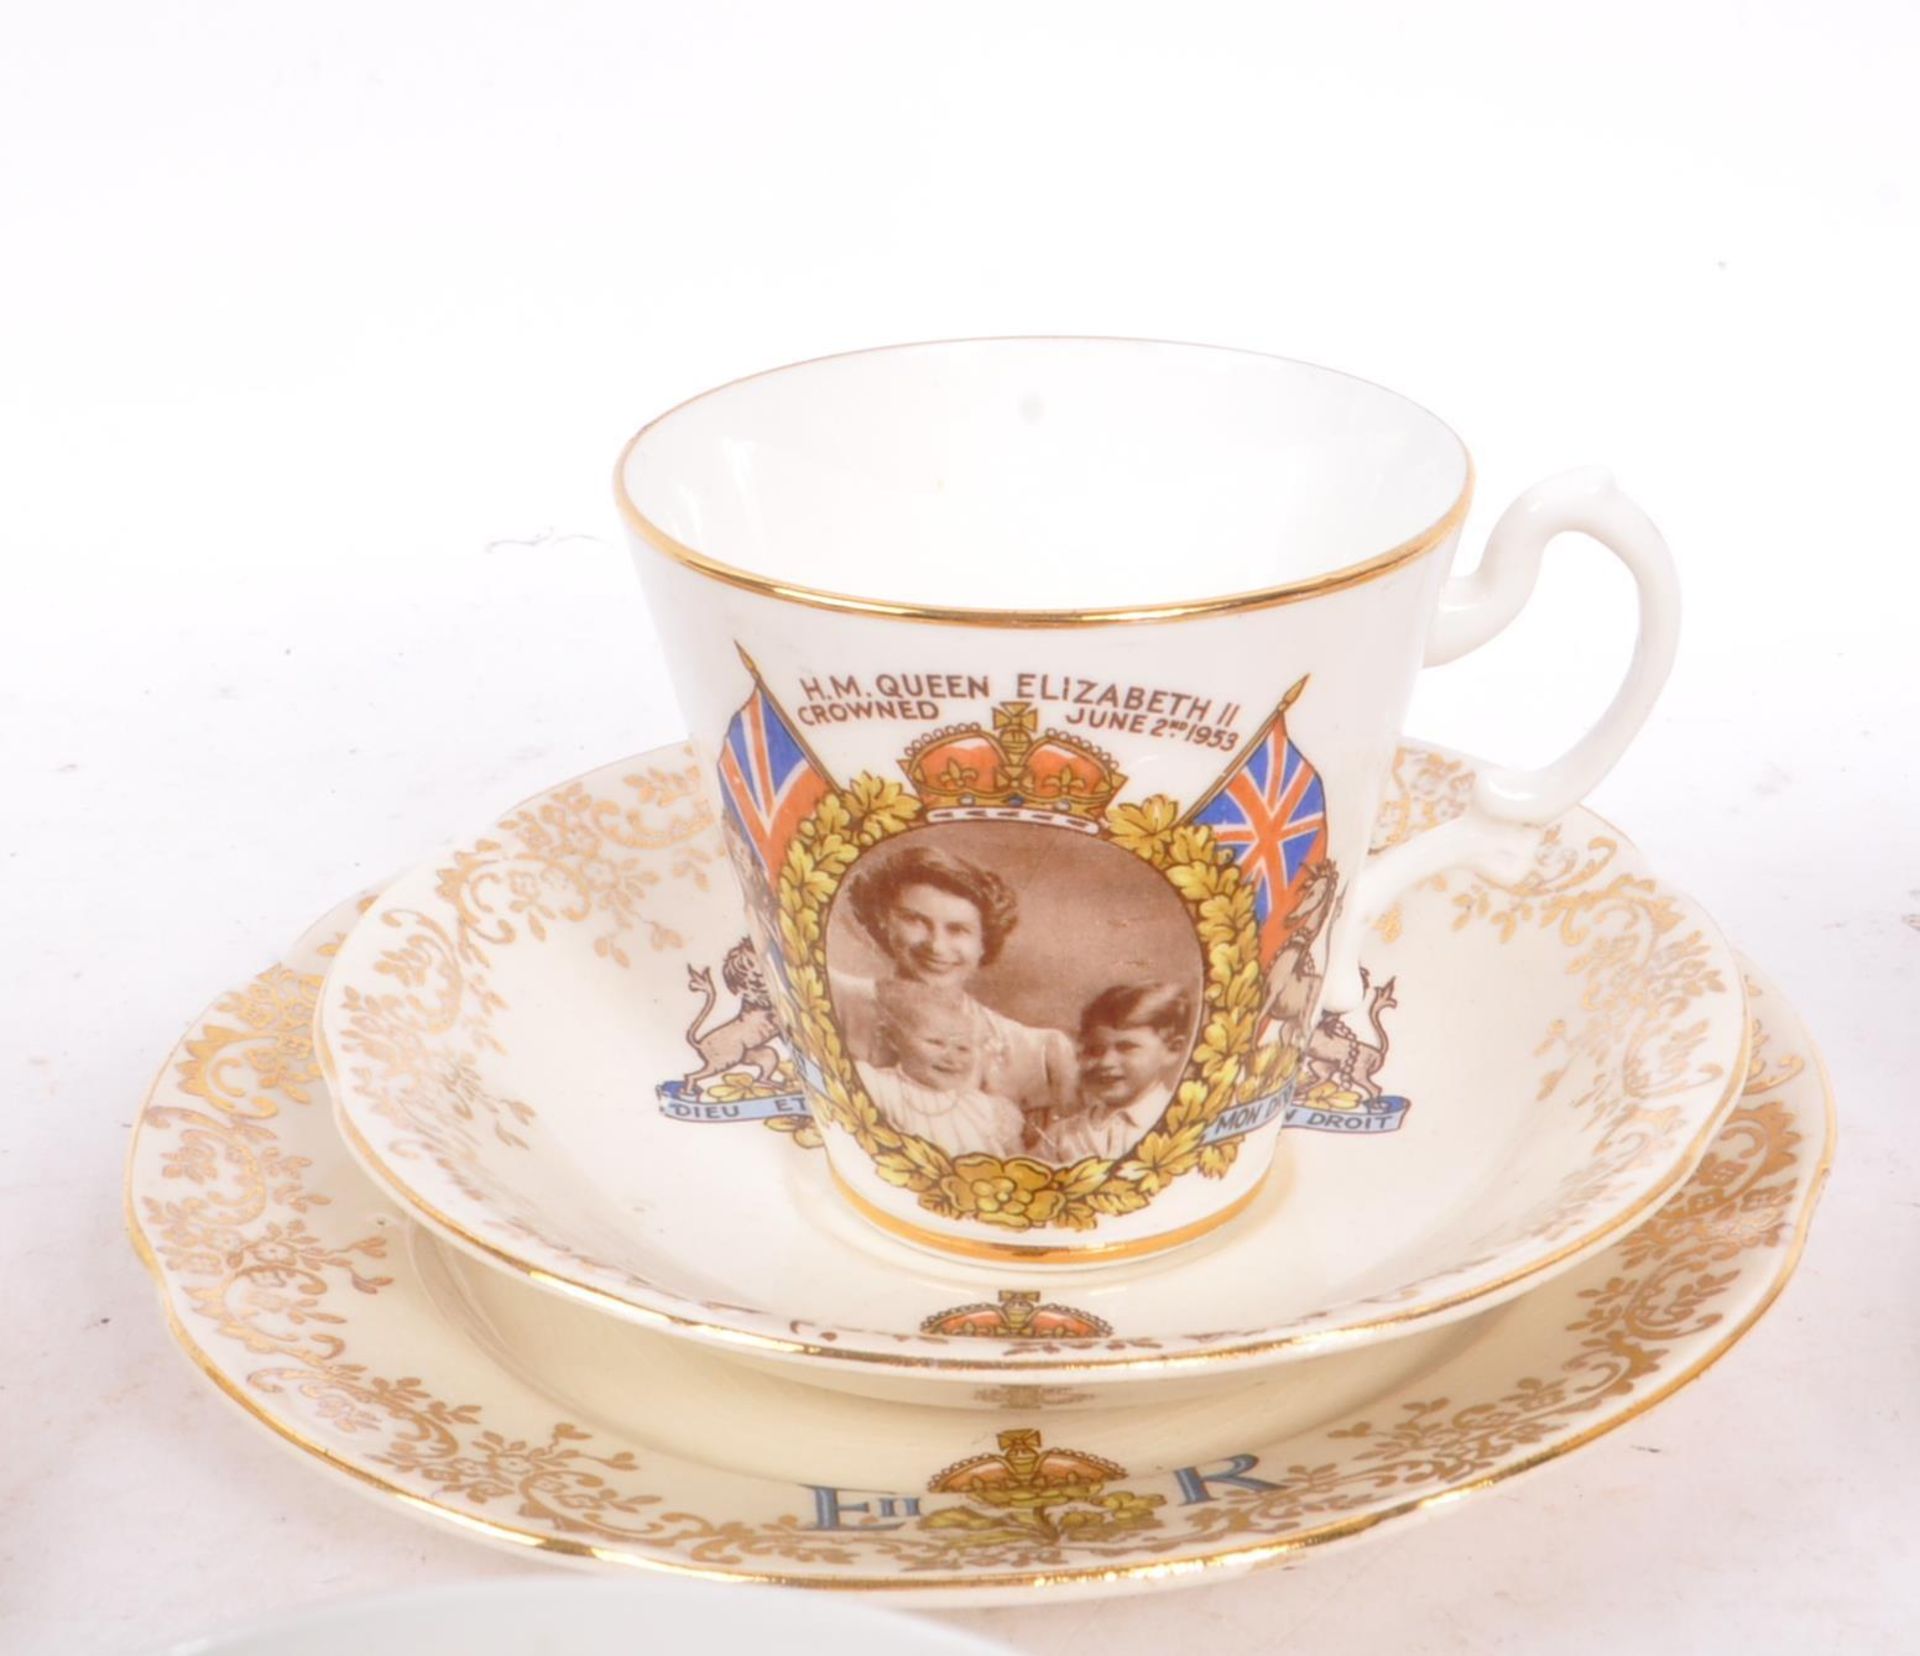 COLLECTION OF QUEEN ELIZABETH II CORONATION CHINA ITEMS - Image 3 of 6